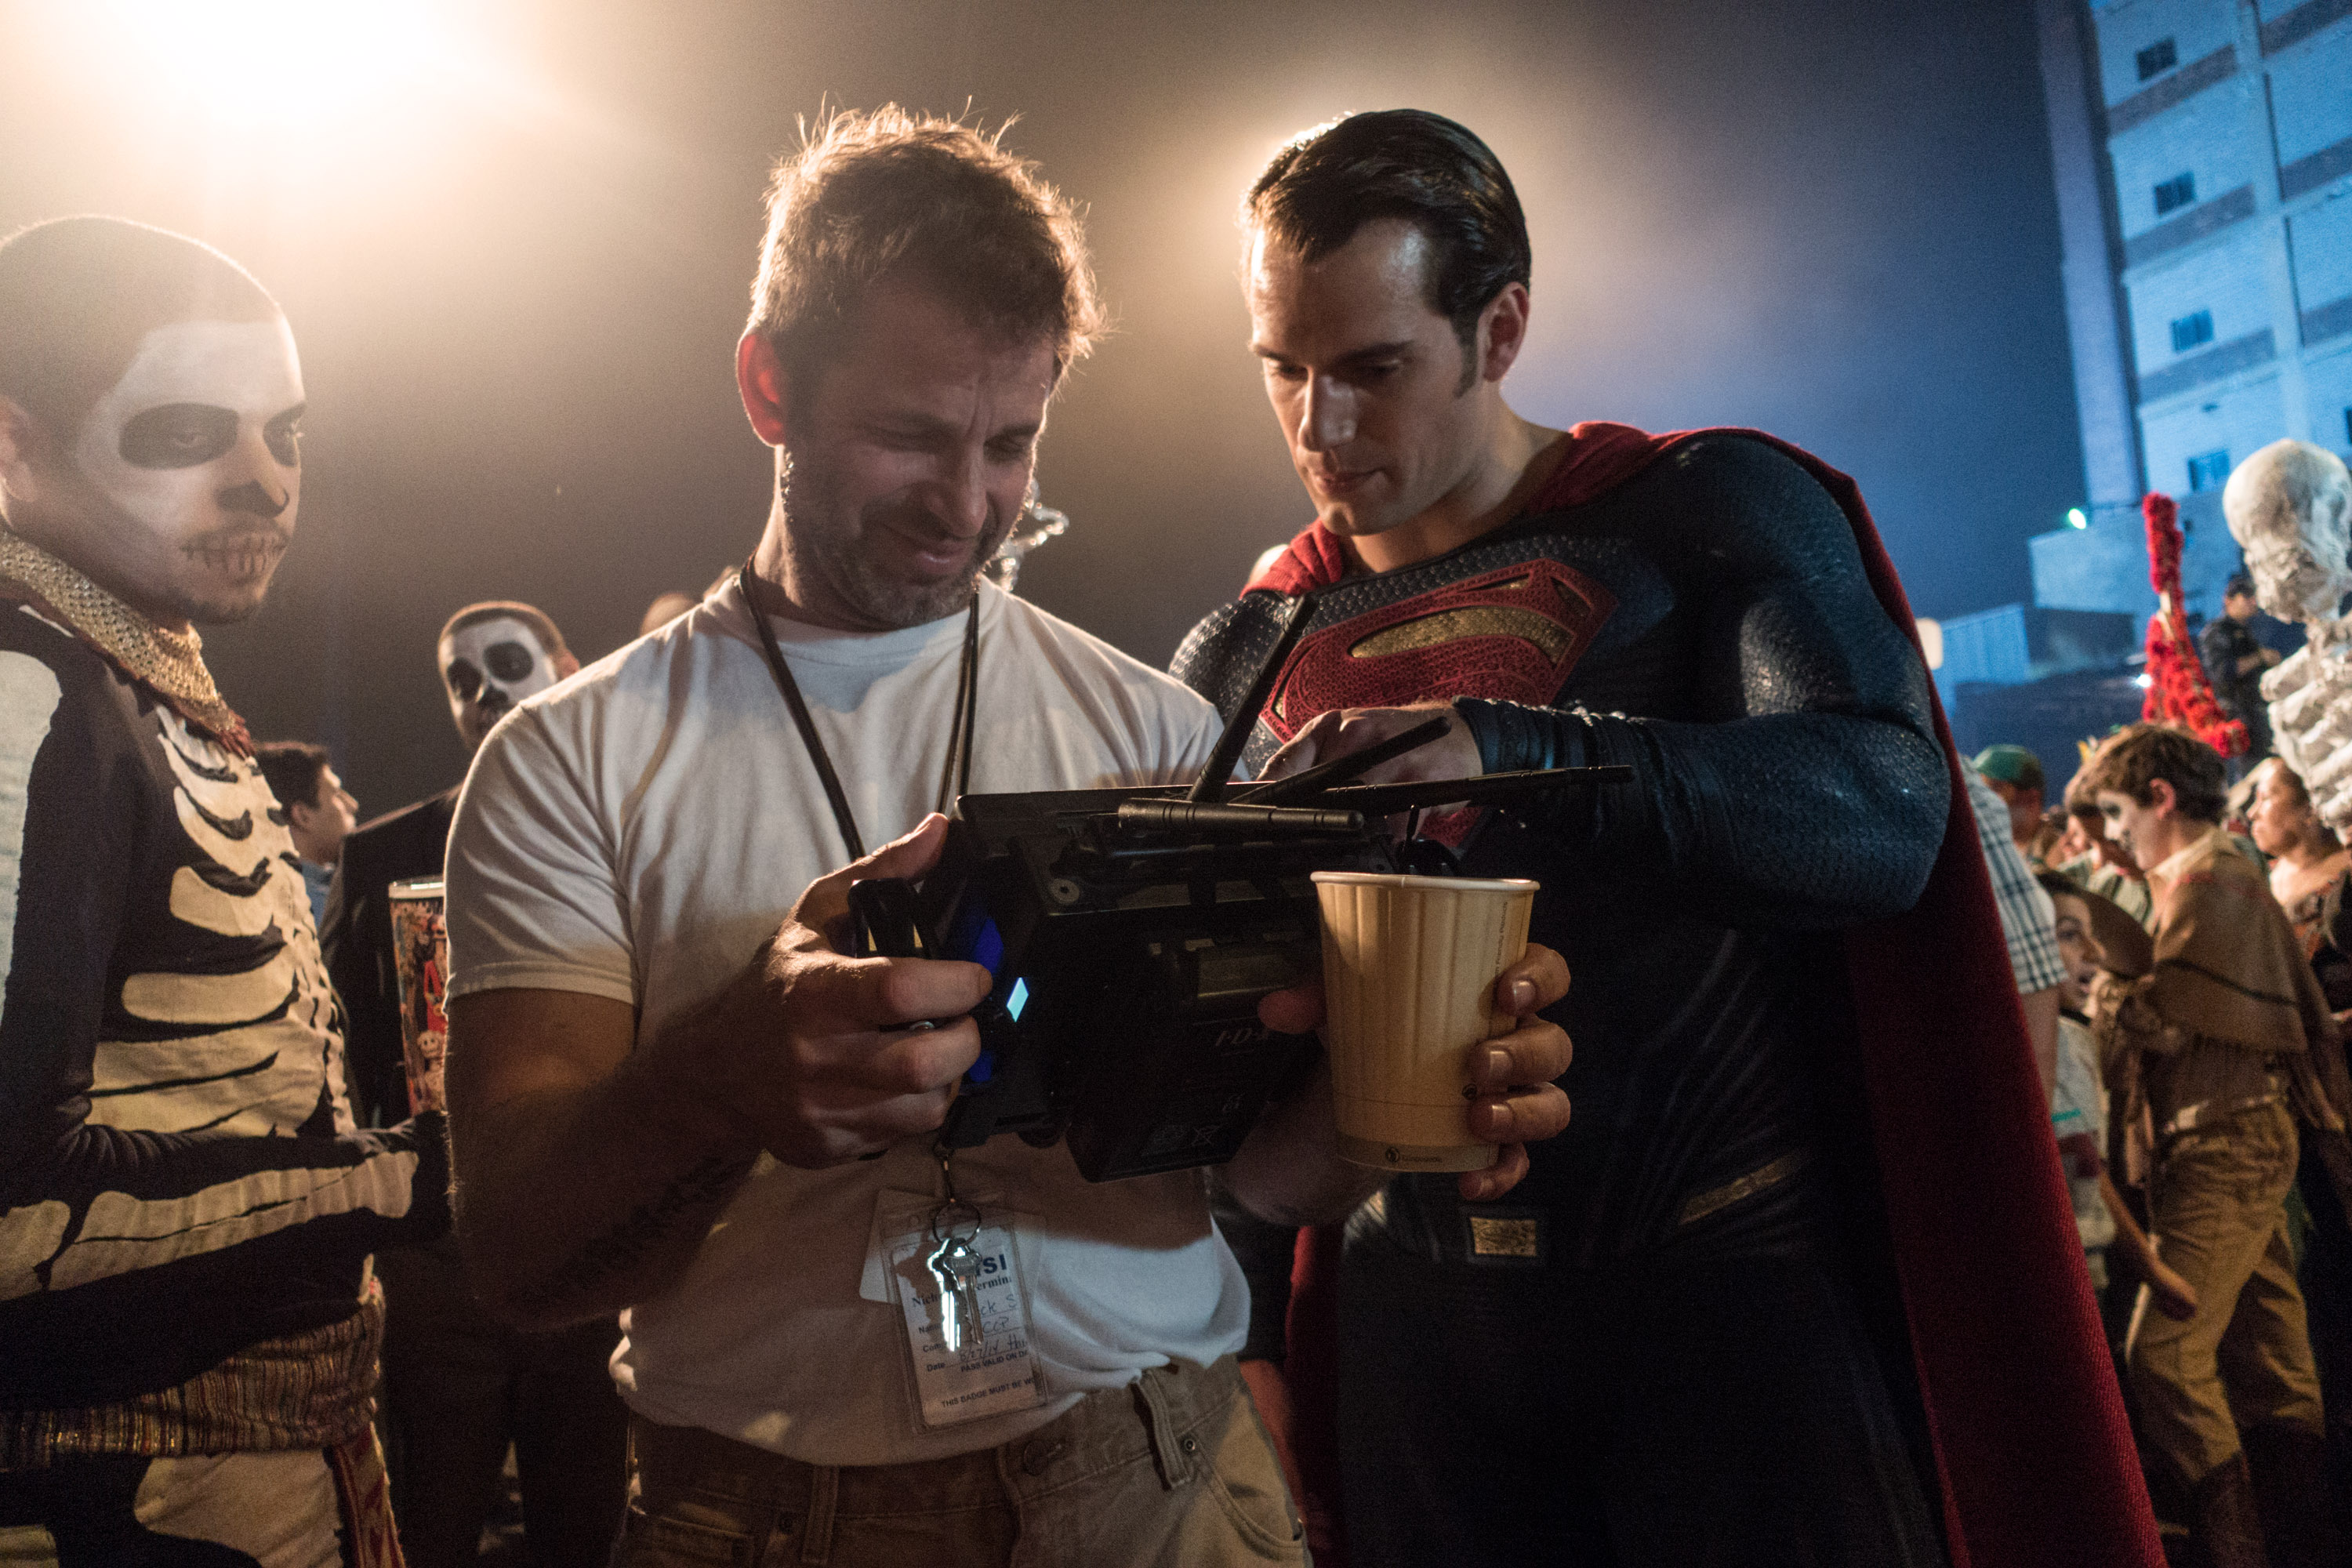 Batman v Superman: Dawn of Justice (2016): Where to Watch and